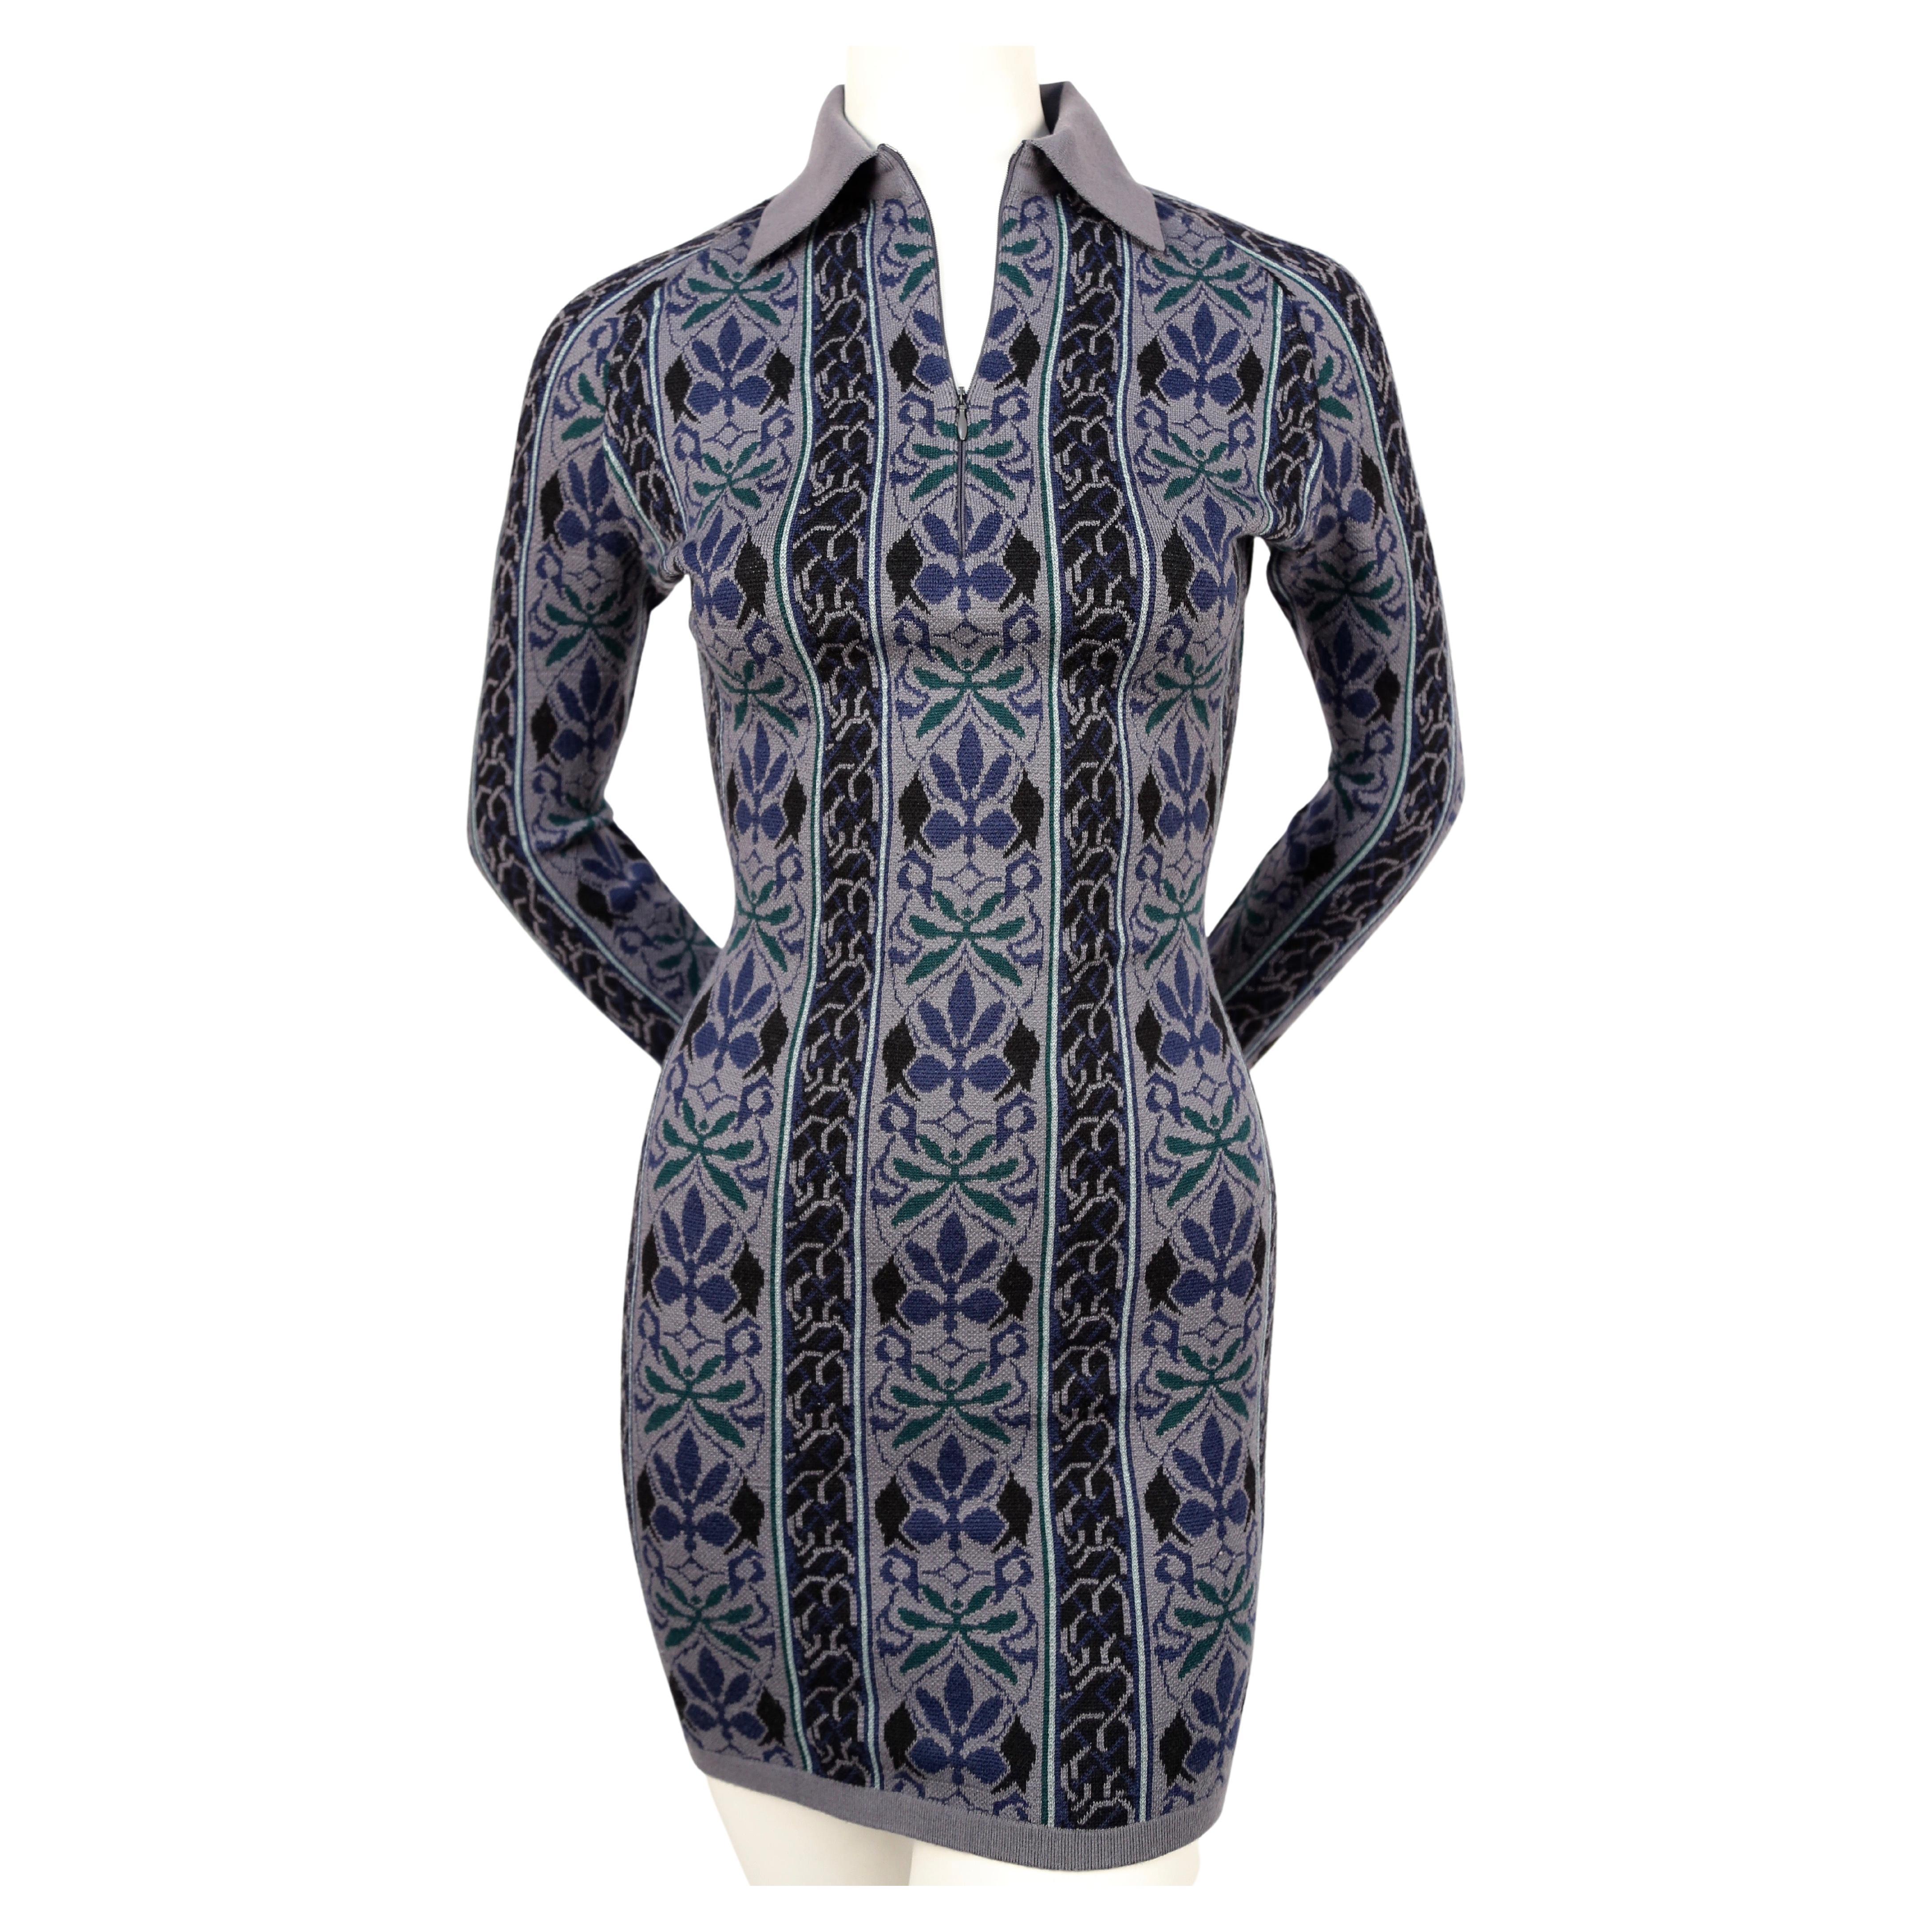 Very rare, blue knit dress with woven abstract floral motif designed by Azzedine Alaia dating to fall of 1990 exactly as seen on the runway. Dress is labeled a size S. Approximate measurements (unstretched): shoulder 14